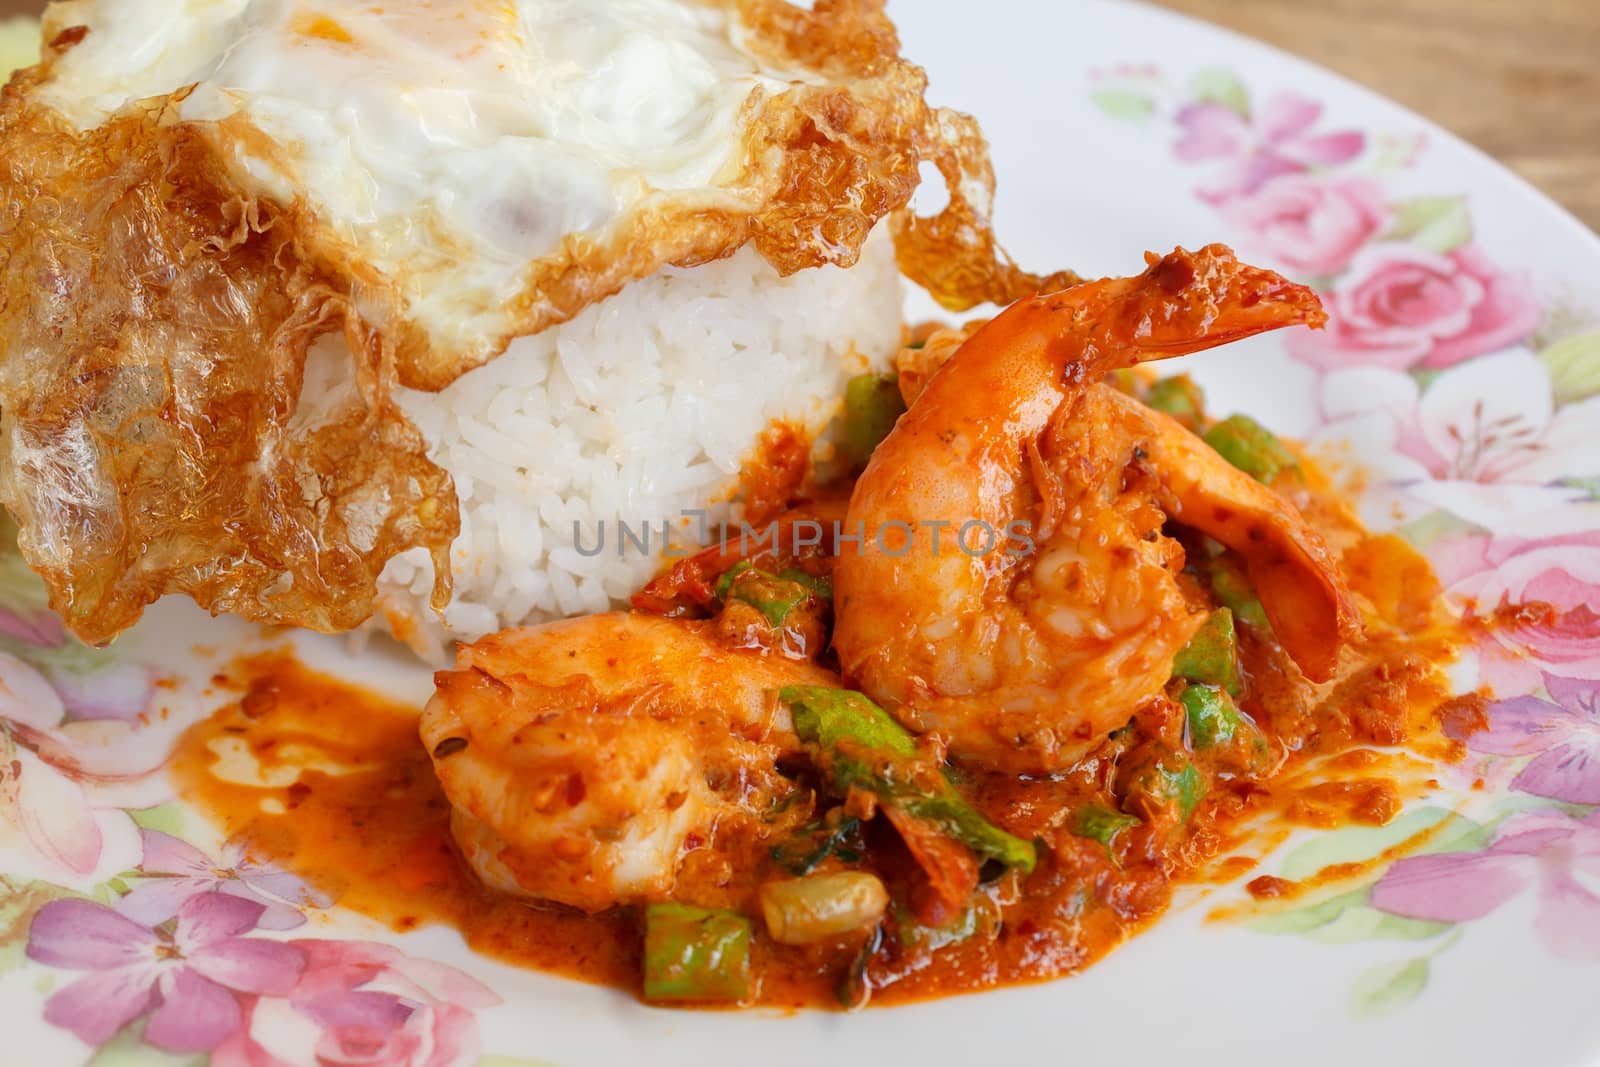 Prawns fried with curry sauce by vitawin